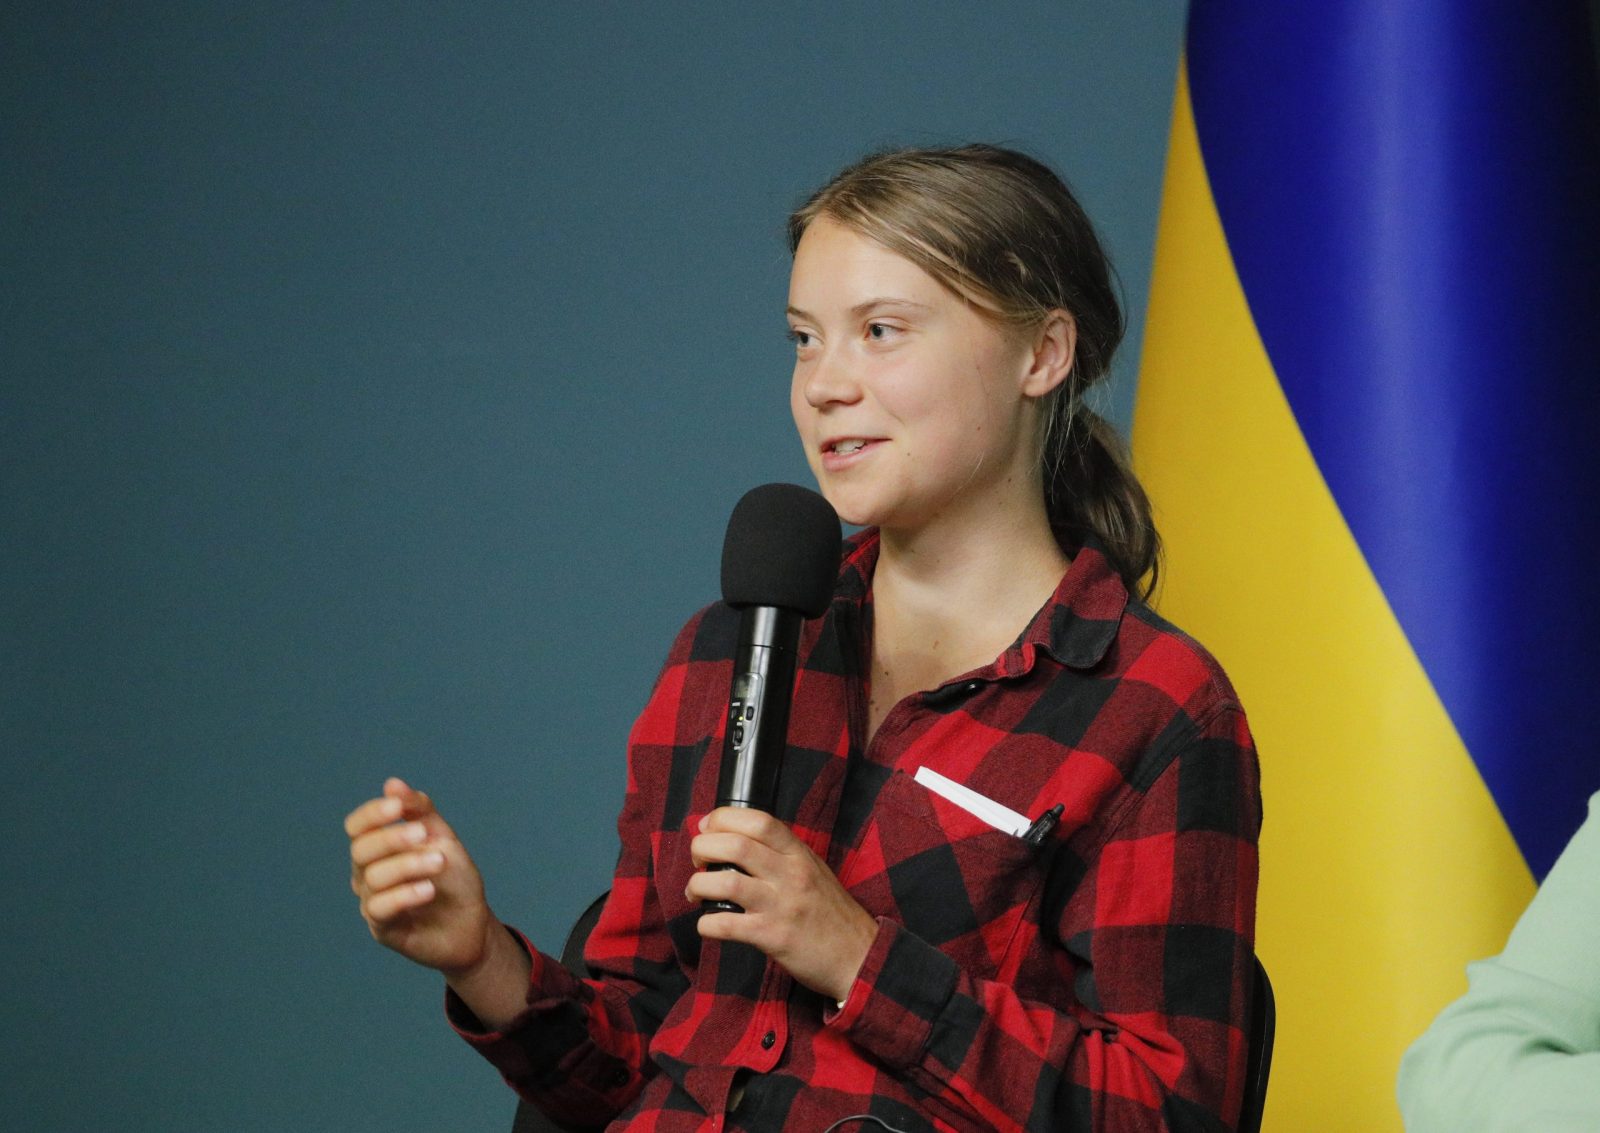 epa10717890 Swedish environmental activist Greta Thunberg addresses a press briefing on the results of the first meeting of the newly created international working group on environmental crimes of Russia, in Kyiv (Kiev), Ukraine, 29 June 2023. The international working group focuses on several areas, including the assessment of the damage caused by Russia to the environment, responsibility for ecocide and other crimes against the environment, and environmental recovery, according to a statement by the Presidency of Ukraine. Russian troops entered Ukrainian territory in February 2022, starting a conflict that has provoked destruction and a humanitarian crisis.  izvještava, BBC.